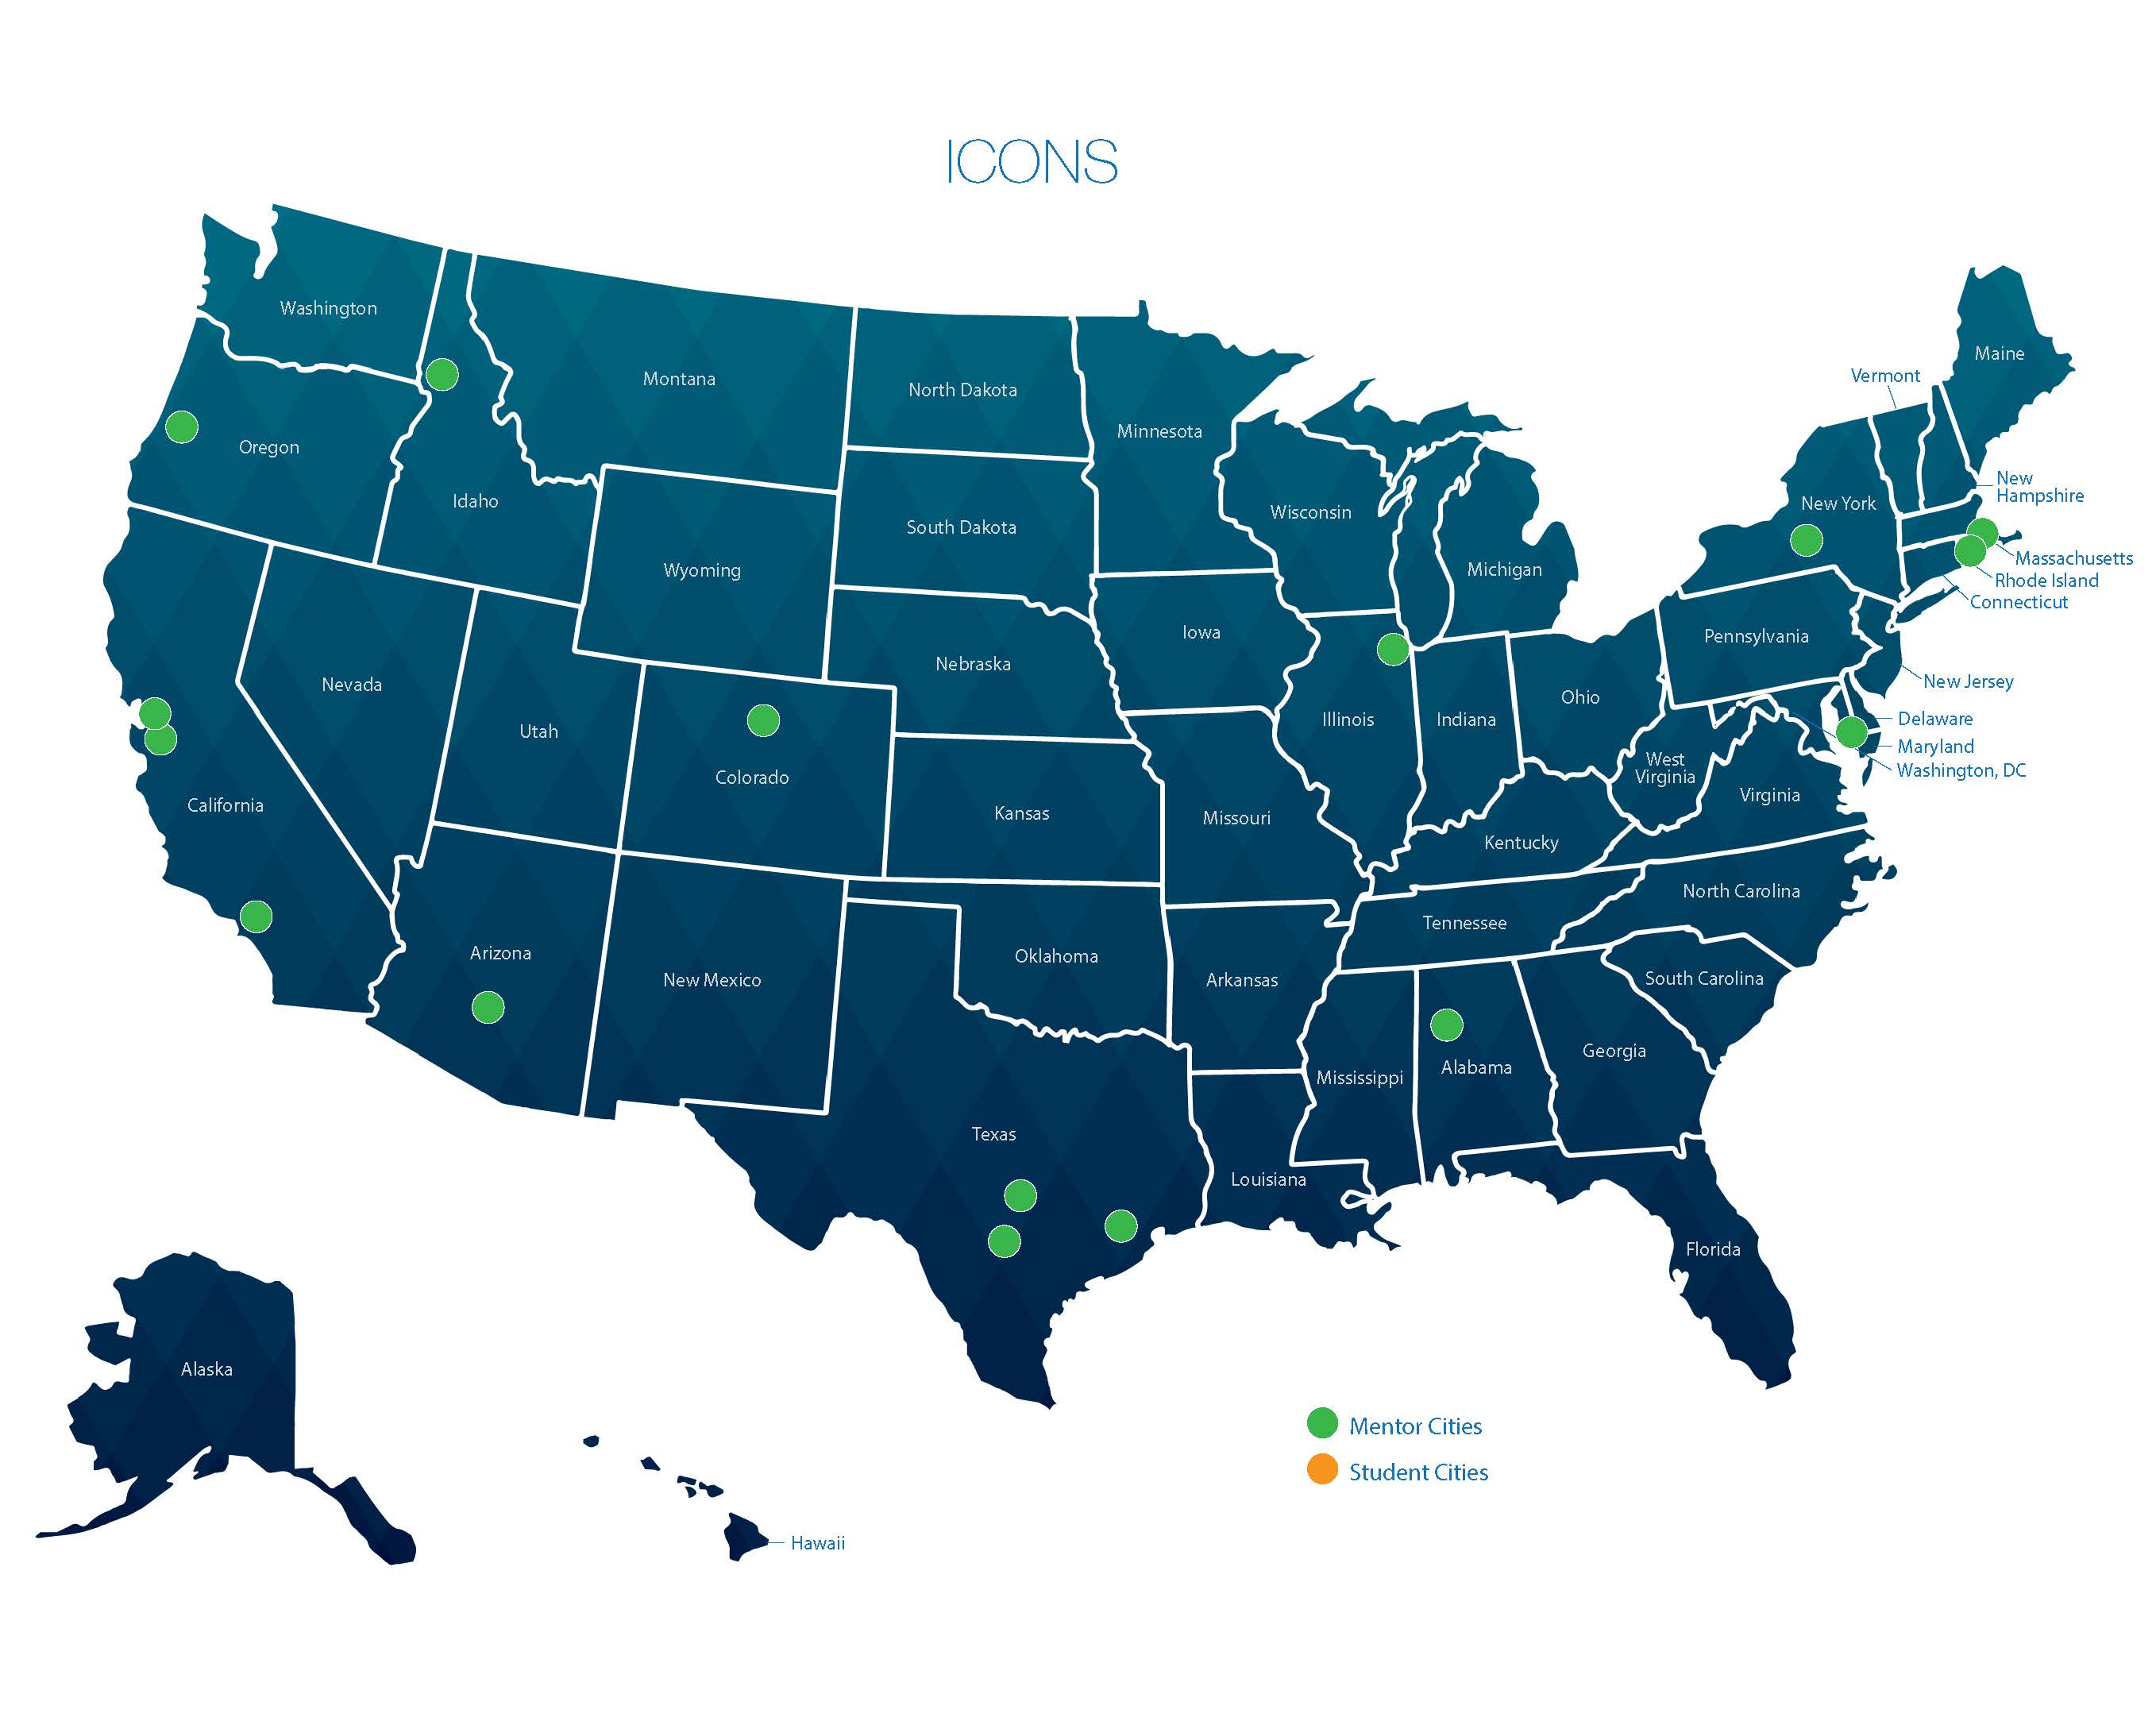 Green map of U.S. with dots showing mentor cities